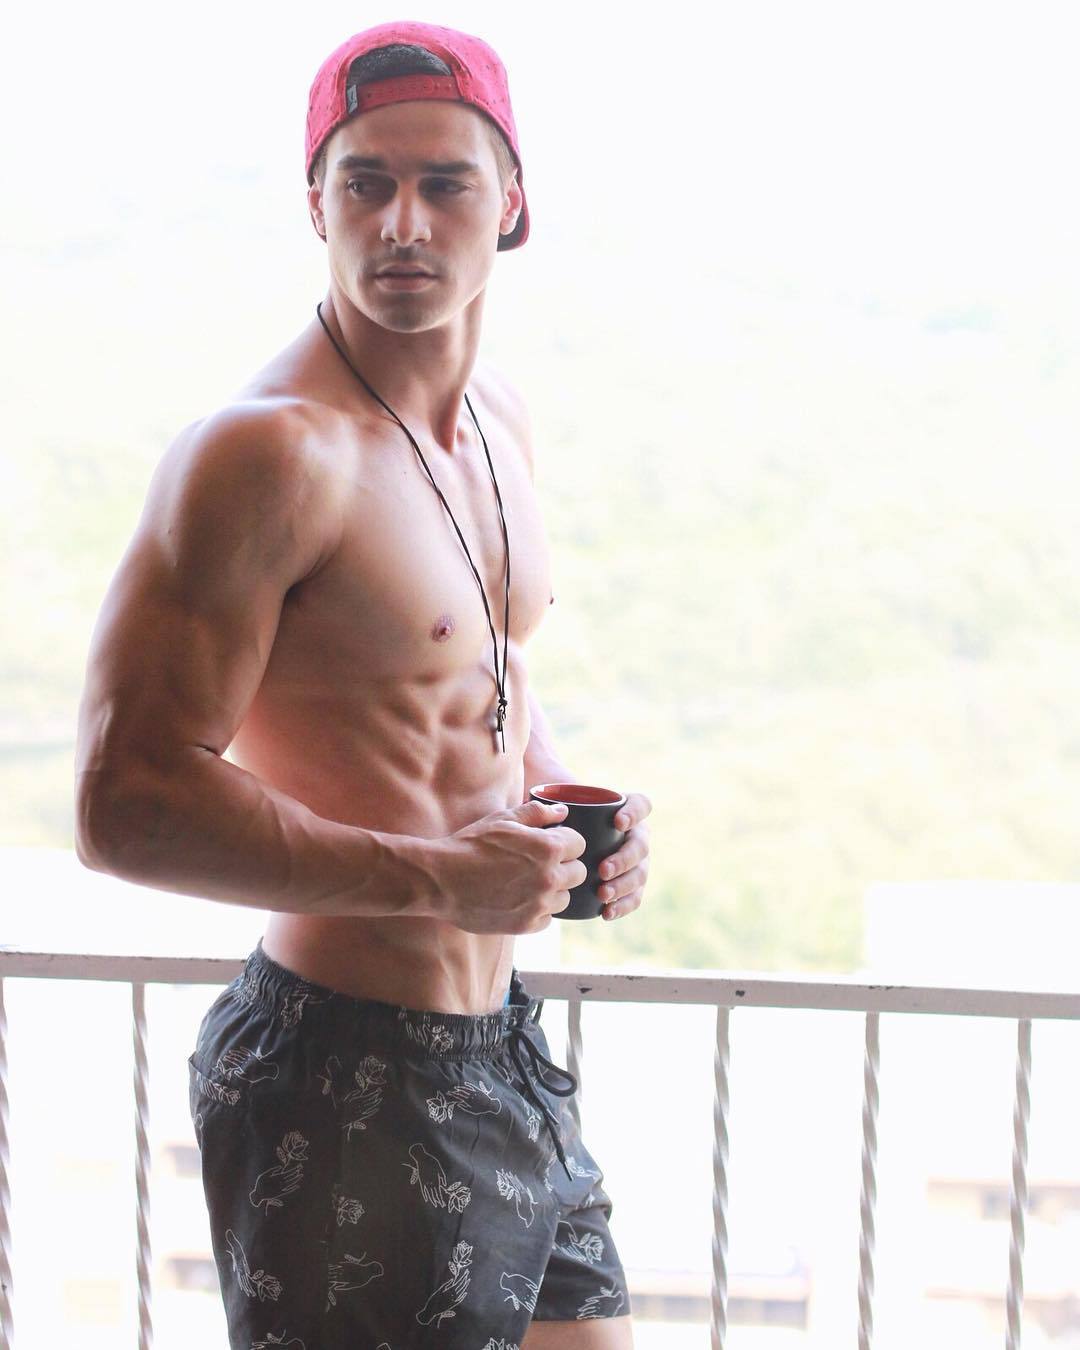 fit-shirtless-bad-boy-neighbor-morning-cup-coffee